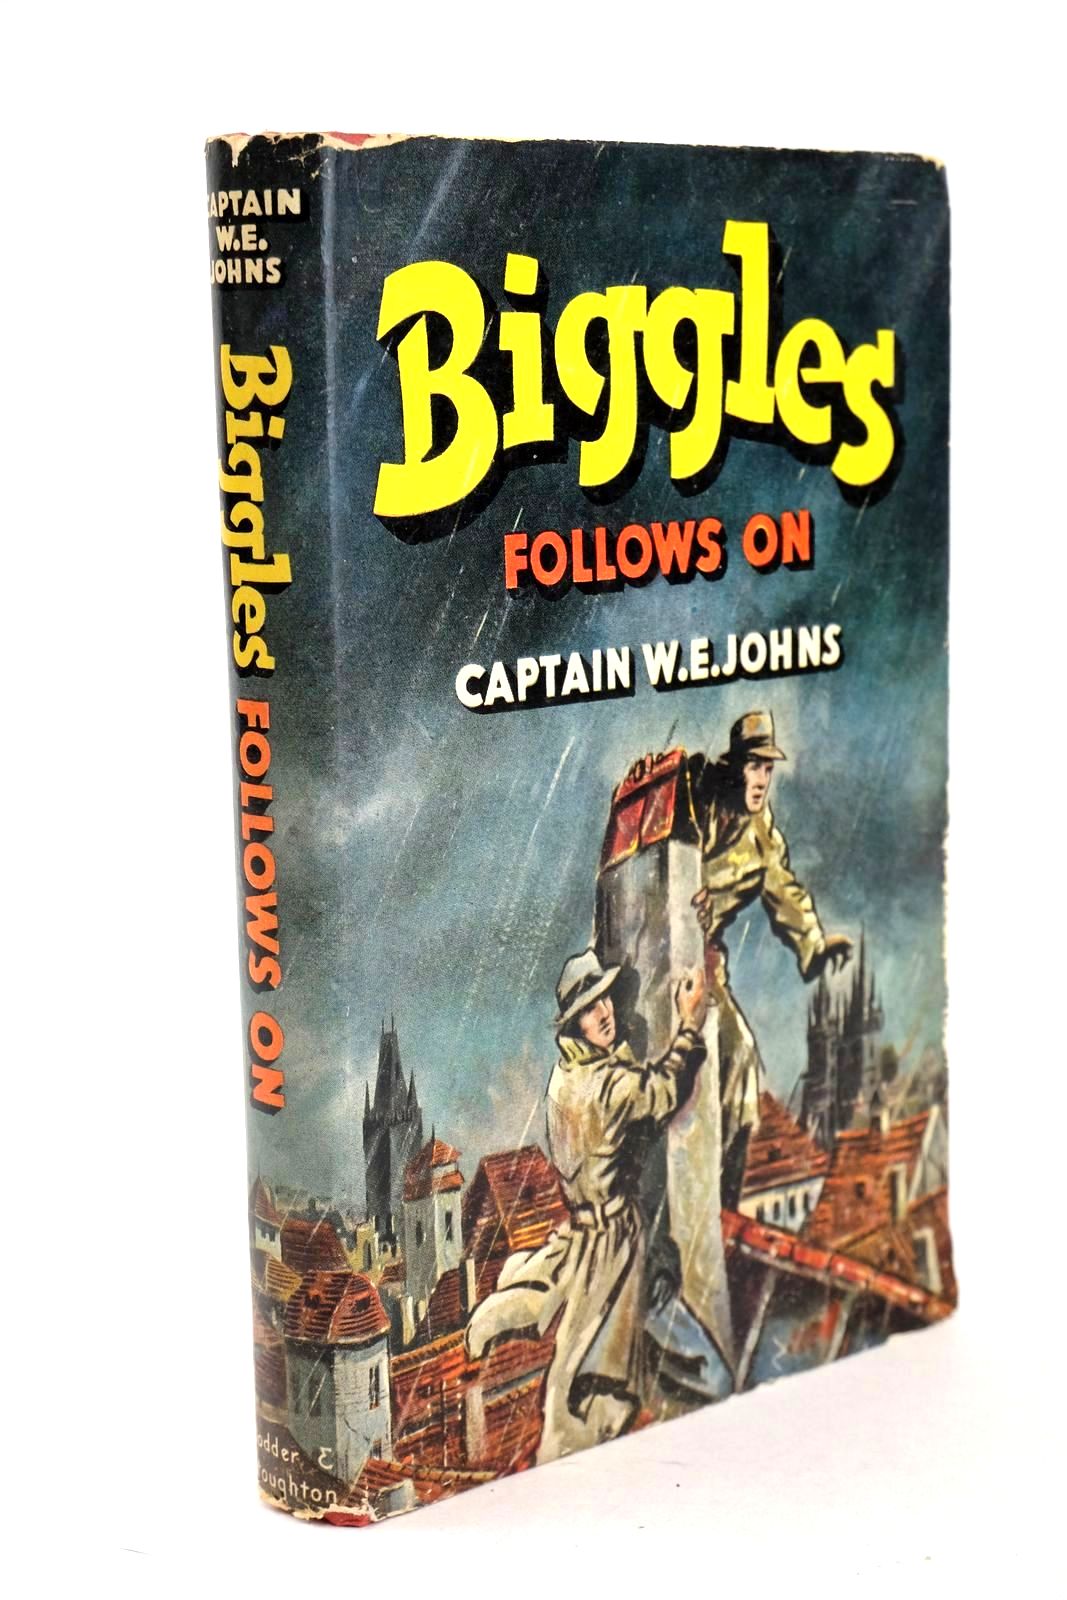 Photo of BIGGLES FOLLOWS ON written by Johns, W.E. illustrated by Stead,  published by Hodder &amp; Stoughton (STOCK CODE: 1326380)  for sale by Stella & Rose's Books